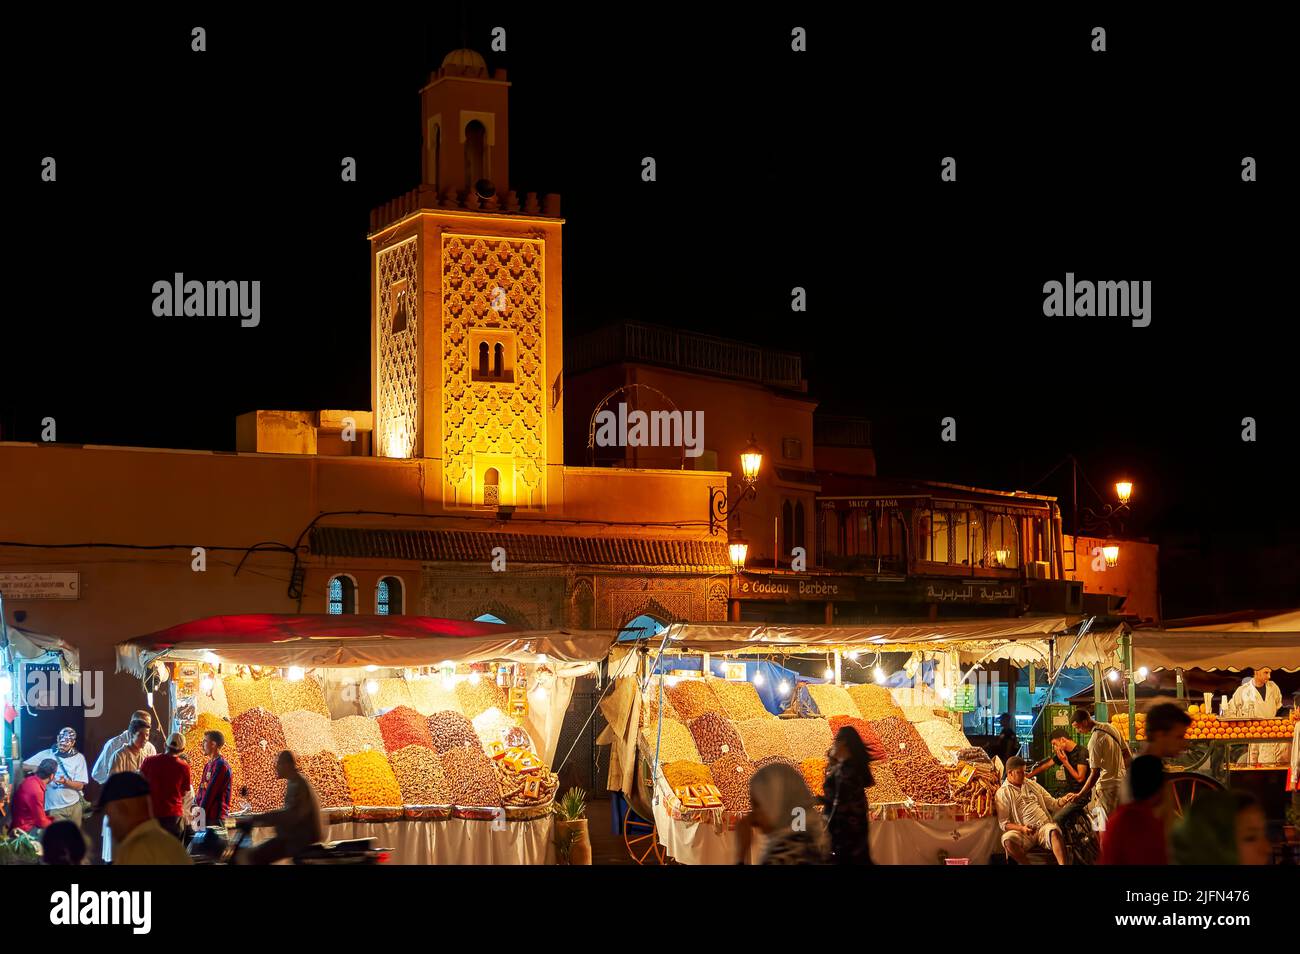 Morocco Marrakesh. The night market in Djema el Fna square at sunset Stock Photo